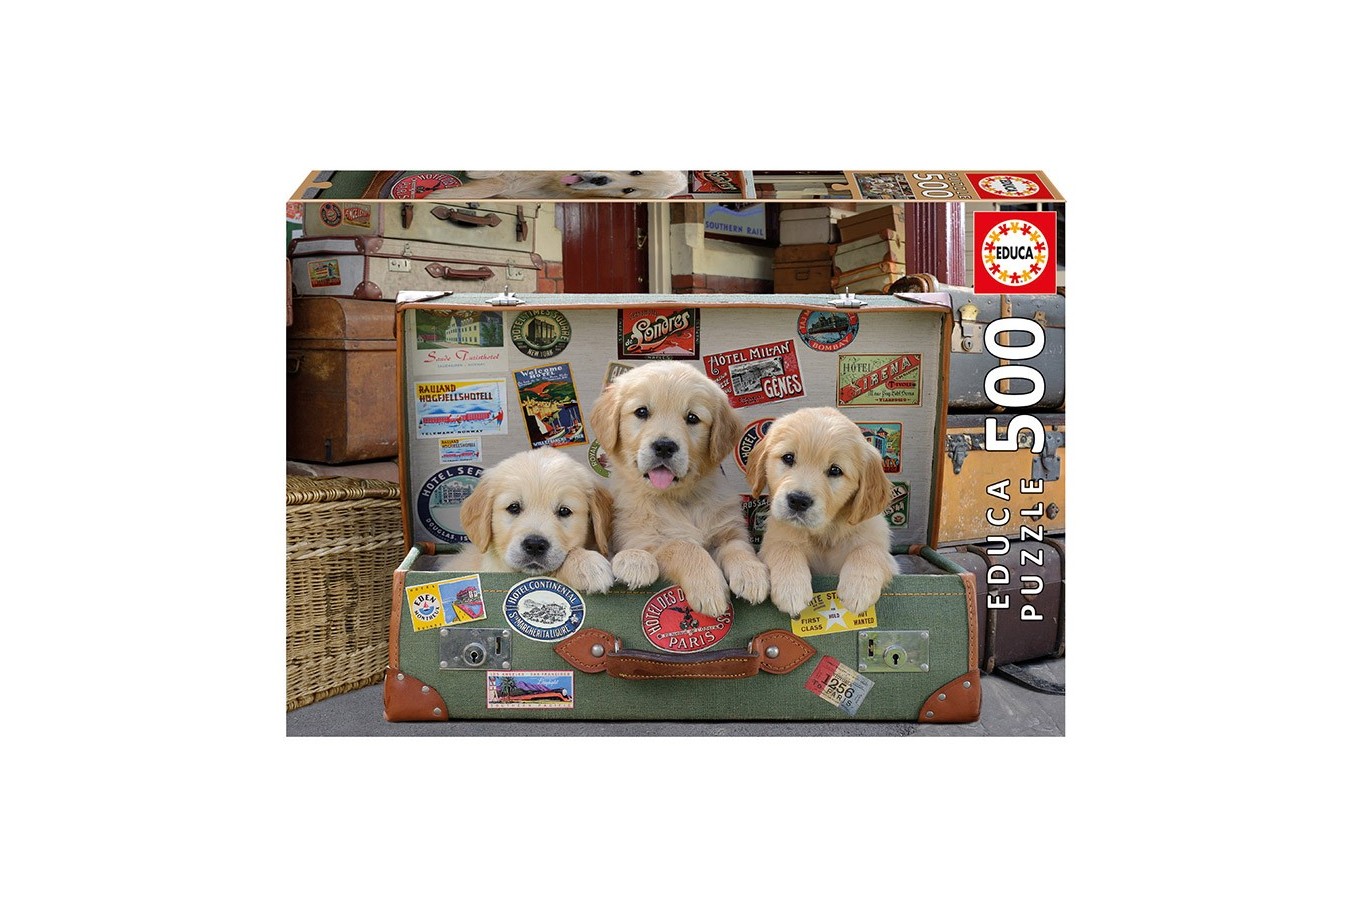 Puzzle Educa - Puppies in the luggage, 500 piese, include lipici puzzle (17645)